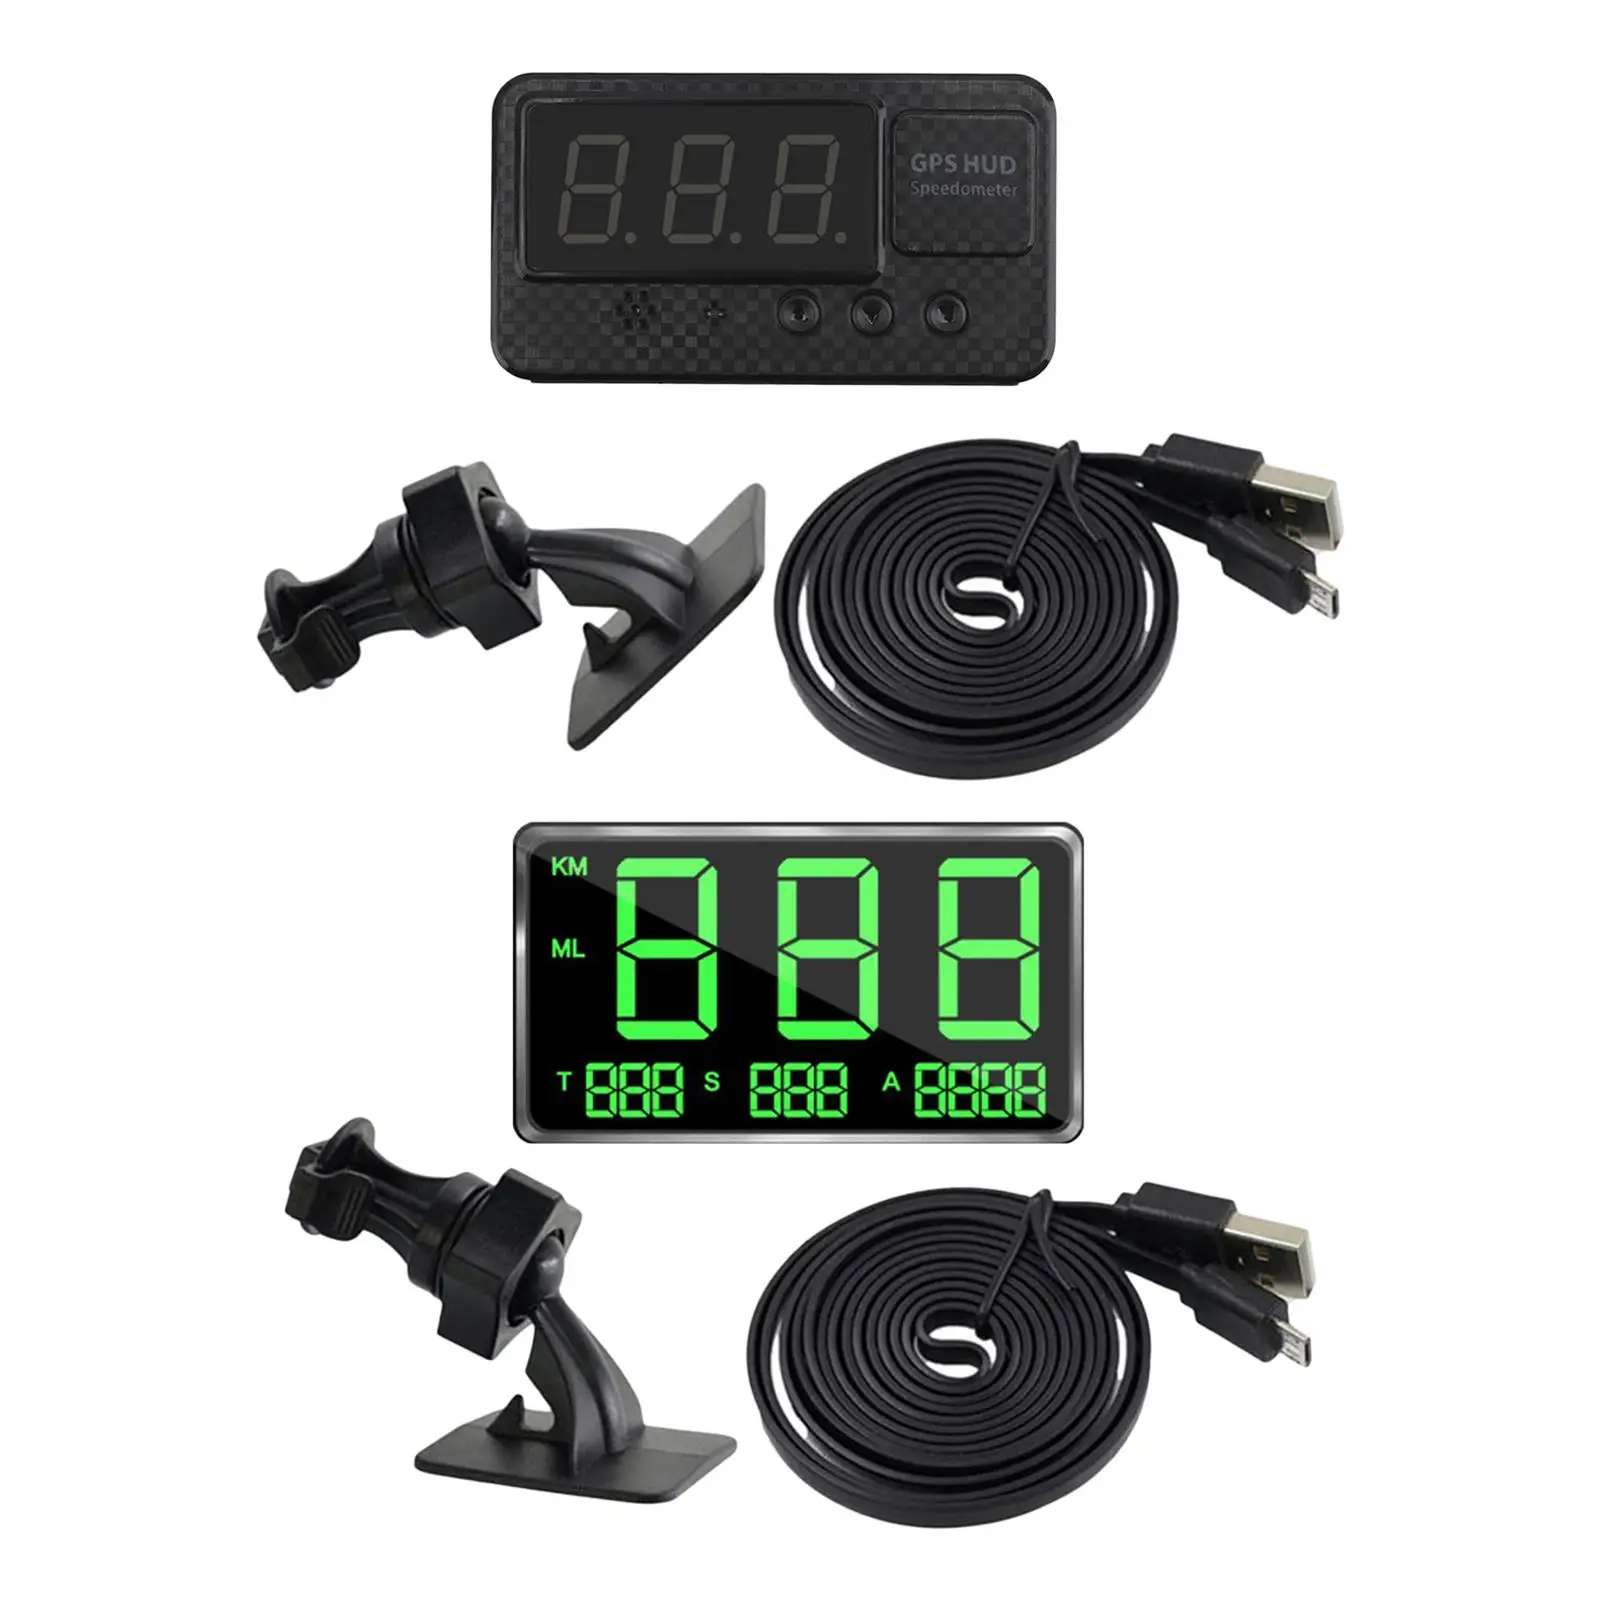 Universal Car GPS Speedometer Speed Alert HUD Head Up Display for All Cars SUV Vehicles Fatigue Driving Alarm Safe Driving